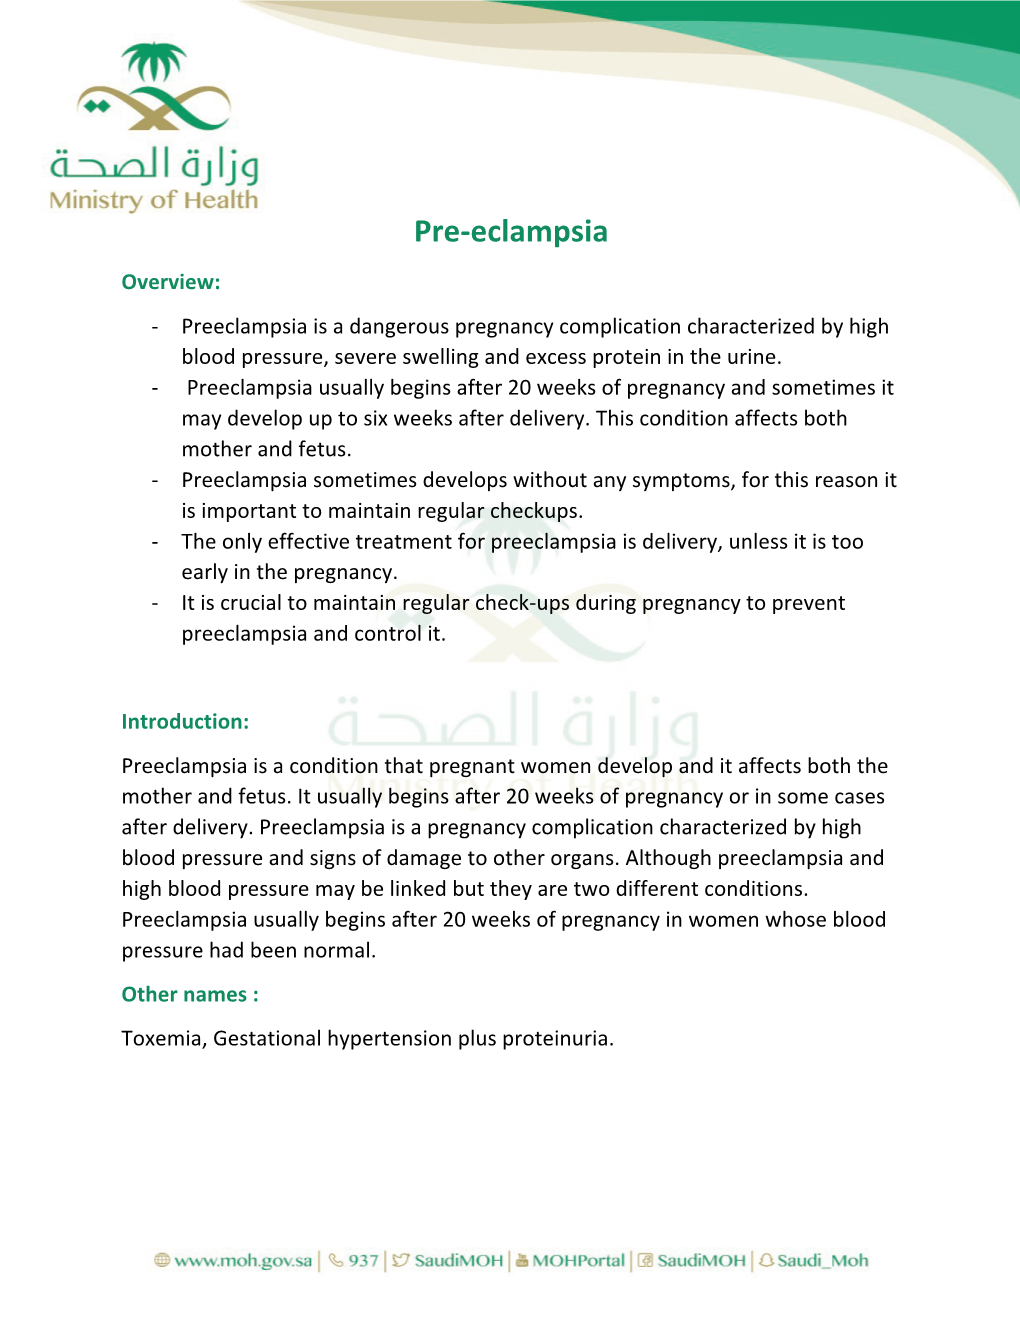 Pre-Eclampsia Overview: - Preeclampsia Is a Dangerous Pregnancy Complication Characterized by High Blood Pressure, Severe Swelling and Excess Protein in the Urine